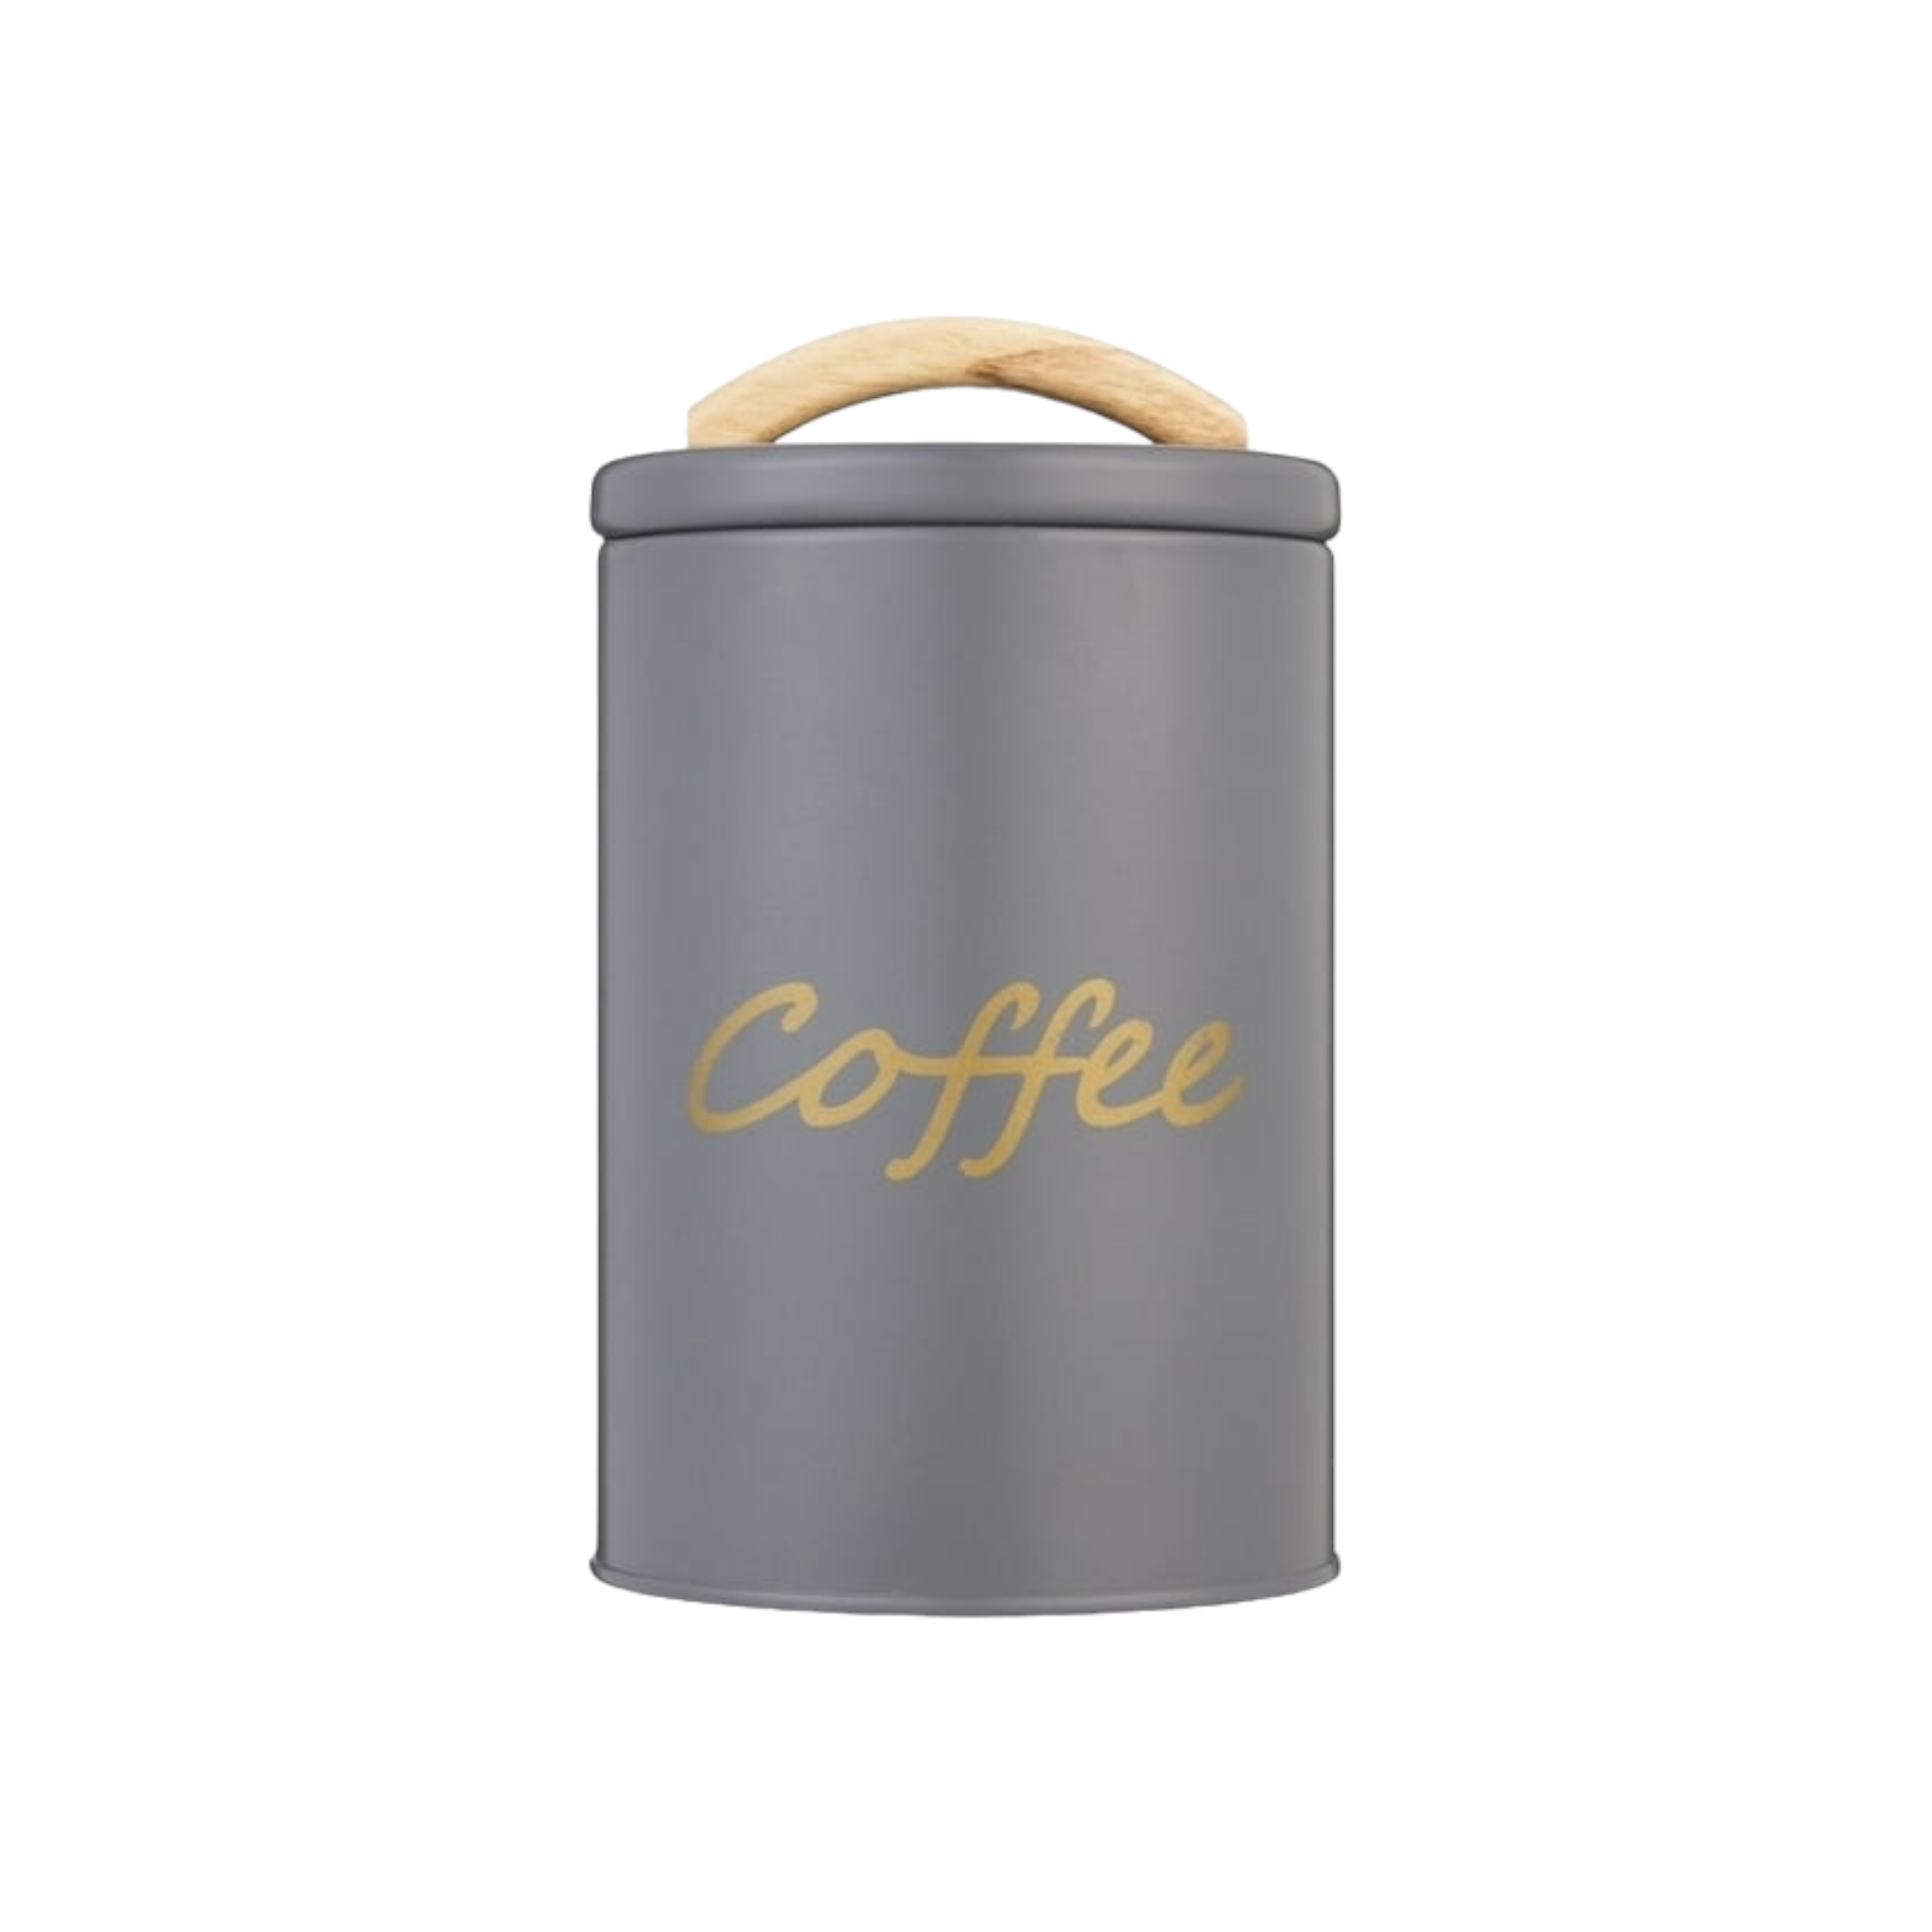 Aqua Tin Coffee Canister Grey with Rubber Wood Handle 29905